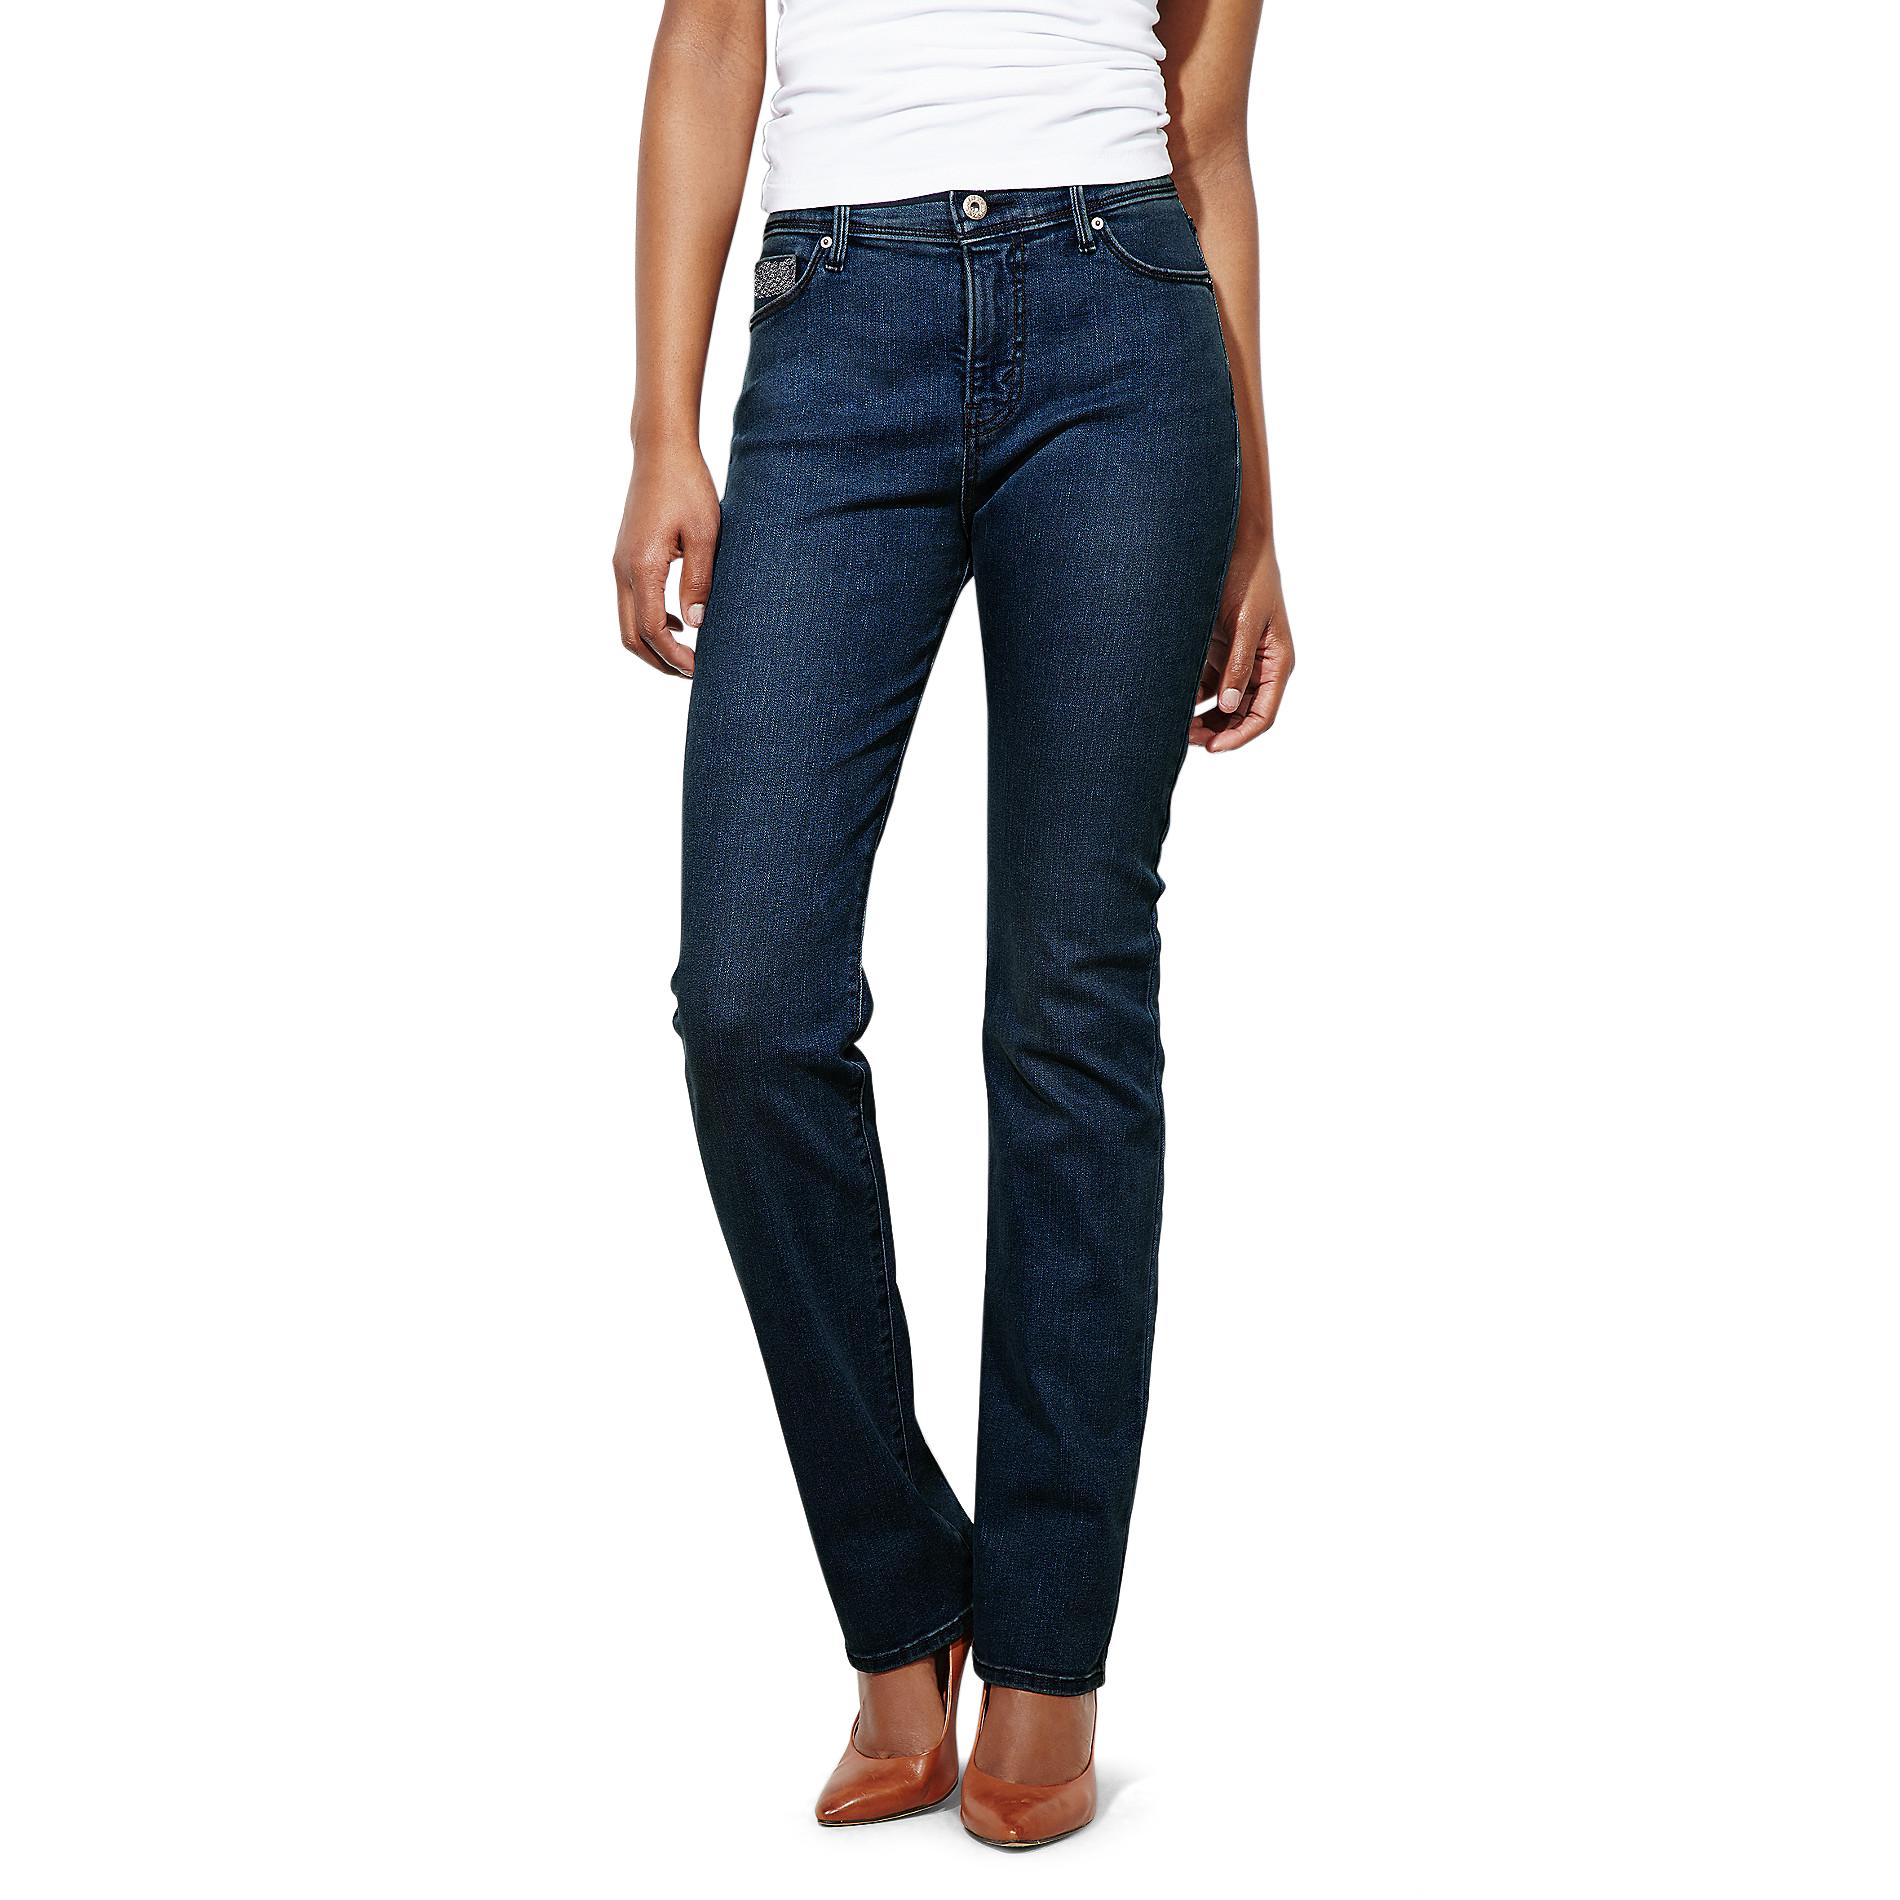 Levi's Women's 512 Perfectly Slimming Straight Leg Jeans